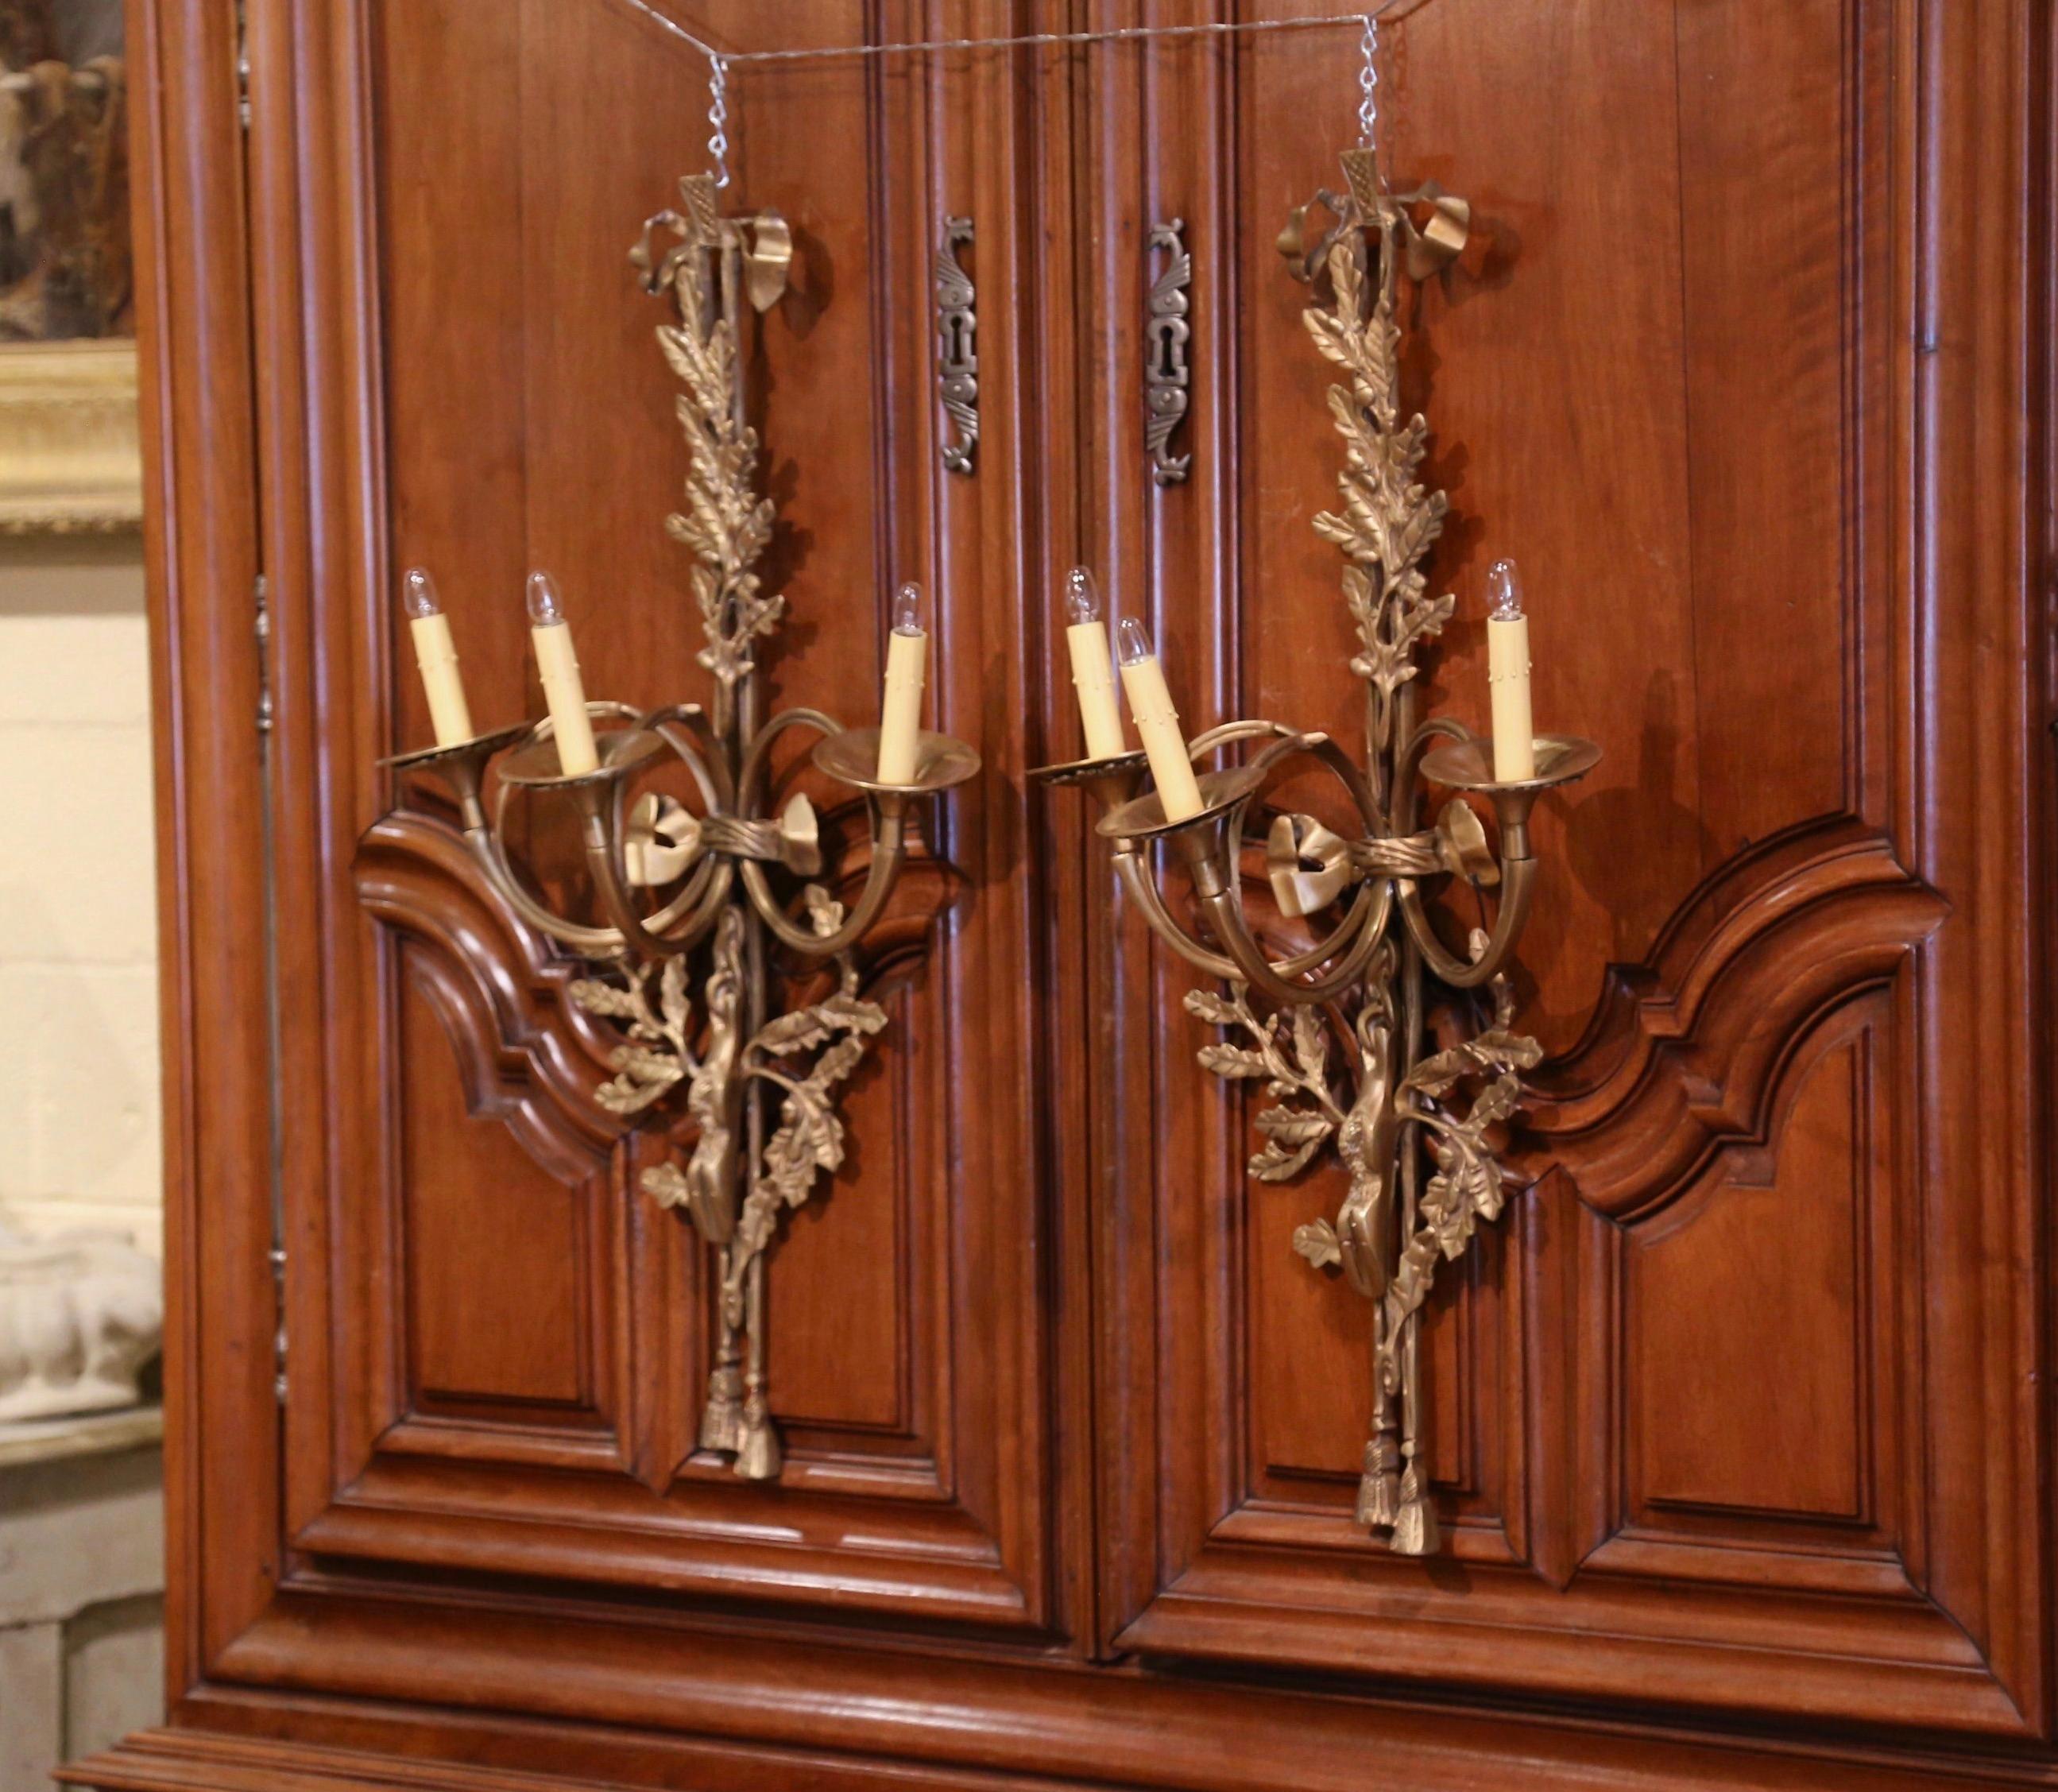 Decorate a hunting lodge or ranch house with this elegant pair of tall vintage sconces. Created in France circa 2010 and made of bronze, each wall light has three horn shaped arms newly wired and dressed with decorative candle sleeve covers. The